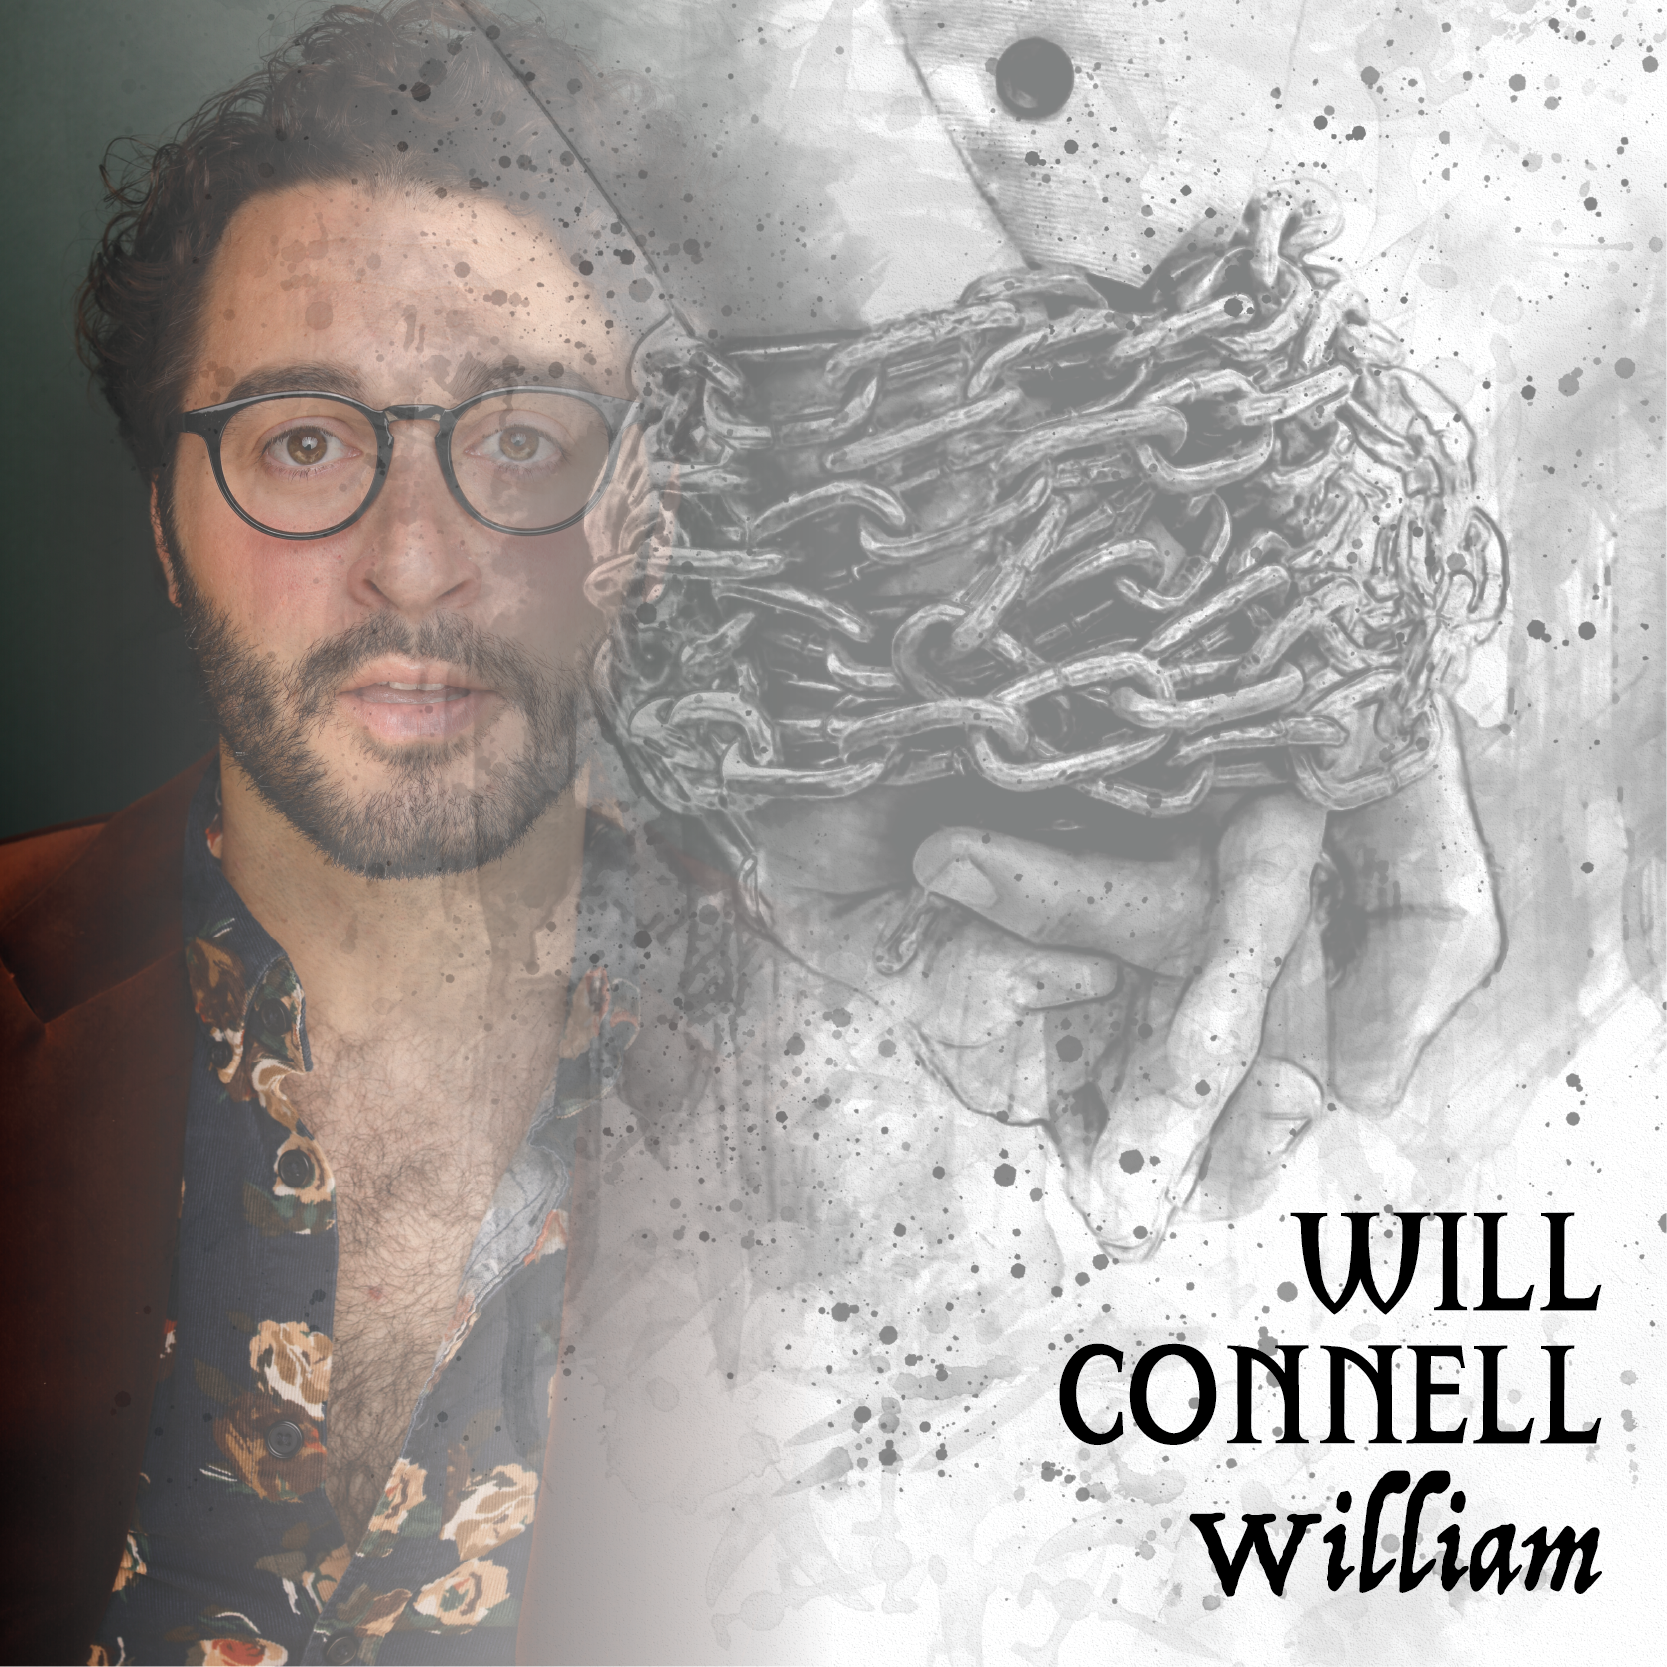 Will Connell is William